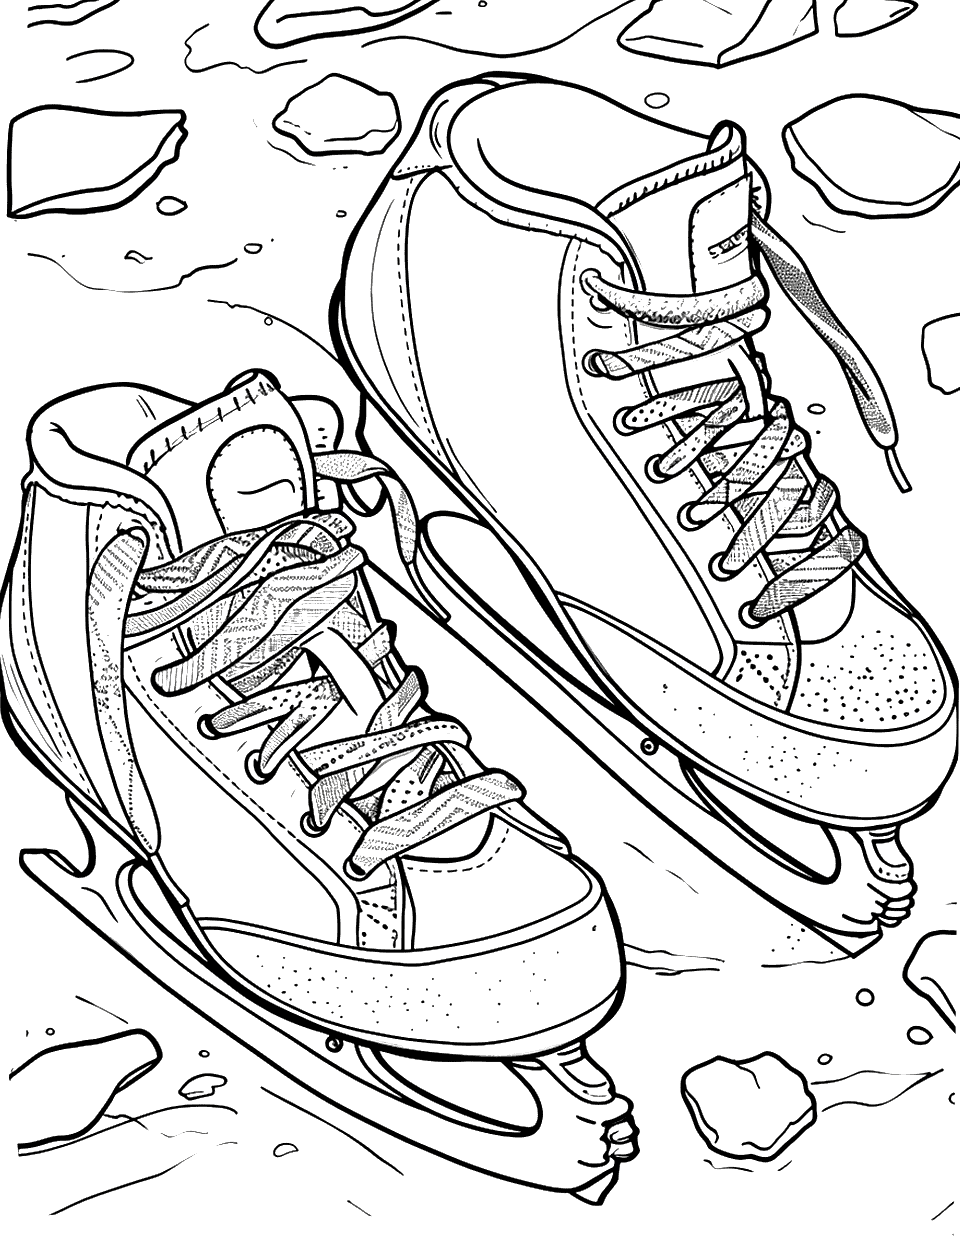 Skating Shoes on Ice Shoe Coloring Page - Ice skating shoes lying next to a frozen pond.